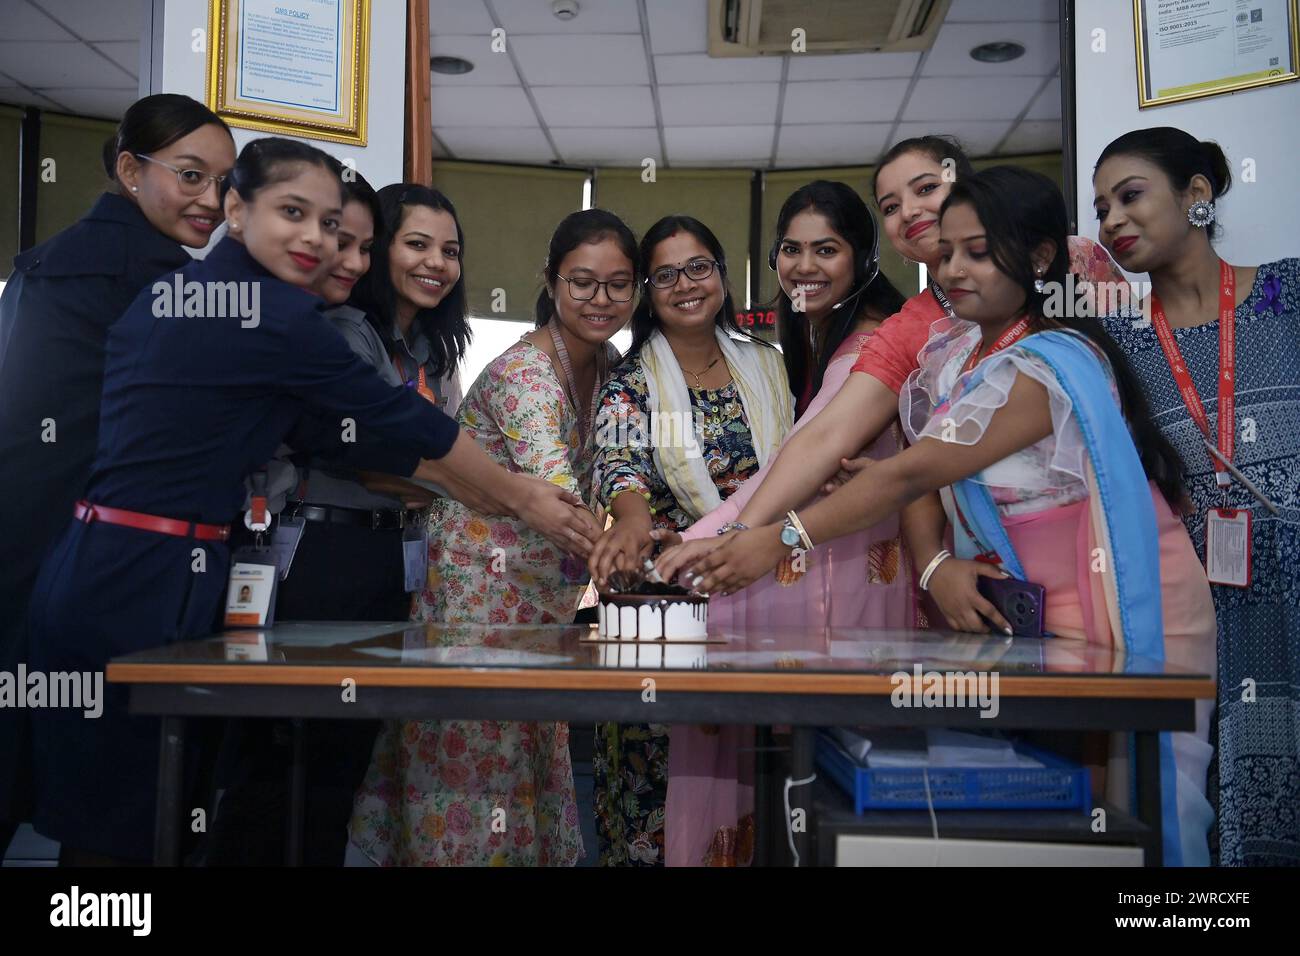 Air traffic controllers, air hostesses, and cabin crew are cutting cake to celebrate International Women's Day at Agartala airport's ATCT Tower in Tripura, India. Stock Photo